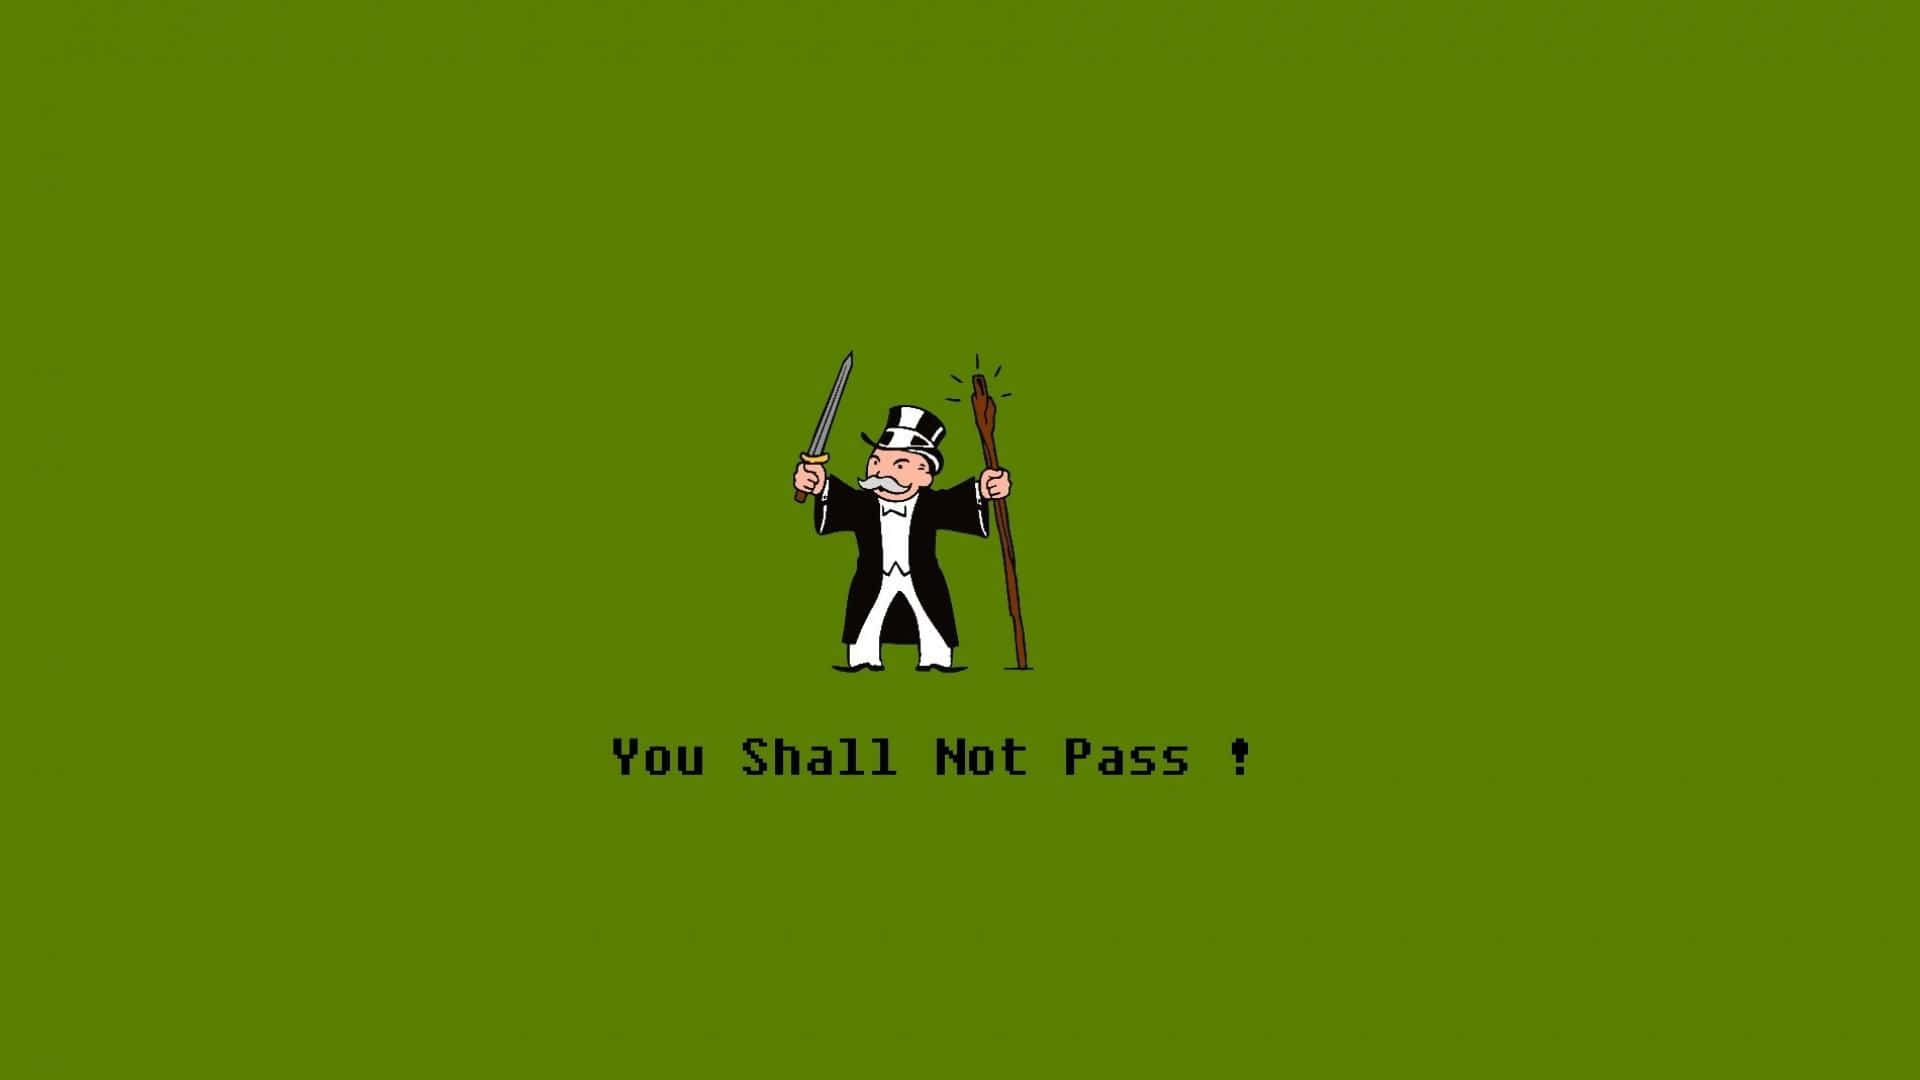 A Cartoon Character Holding A Sword And Saying You Shall Not Pass